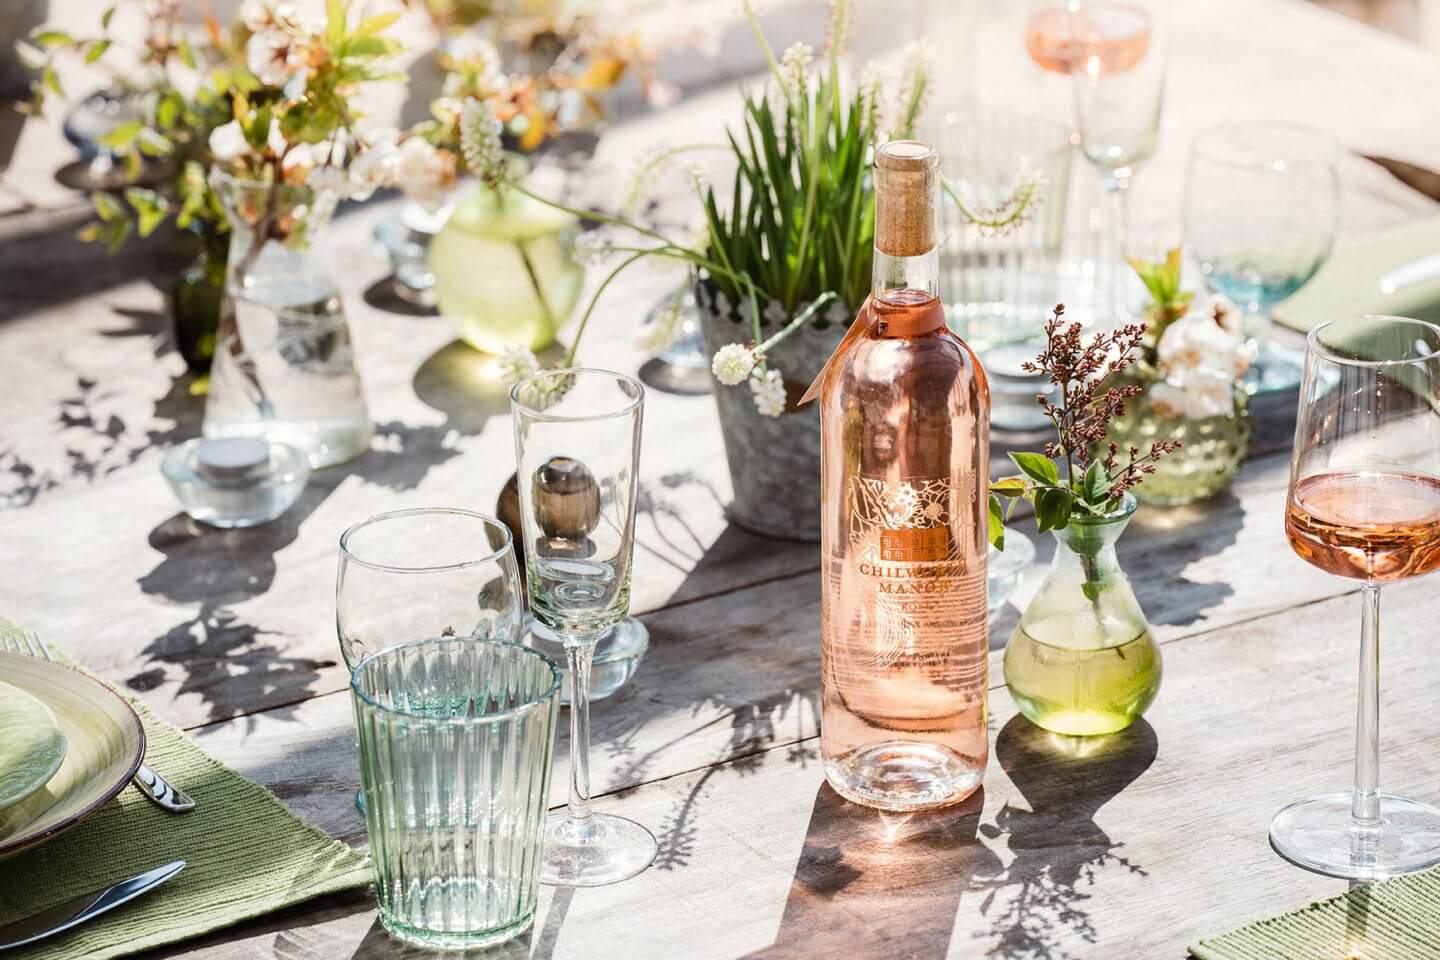 Chilworth Manor Vineyard rosé wine with summer table setting outdoor dining Surrey